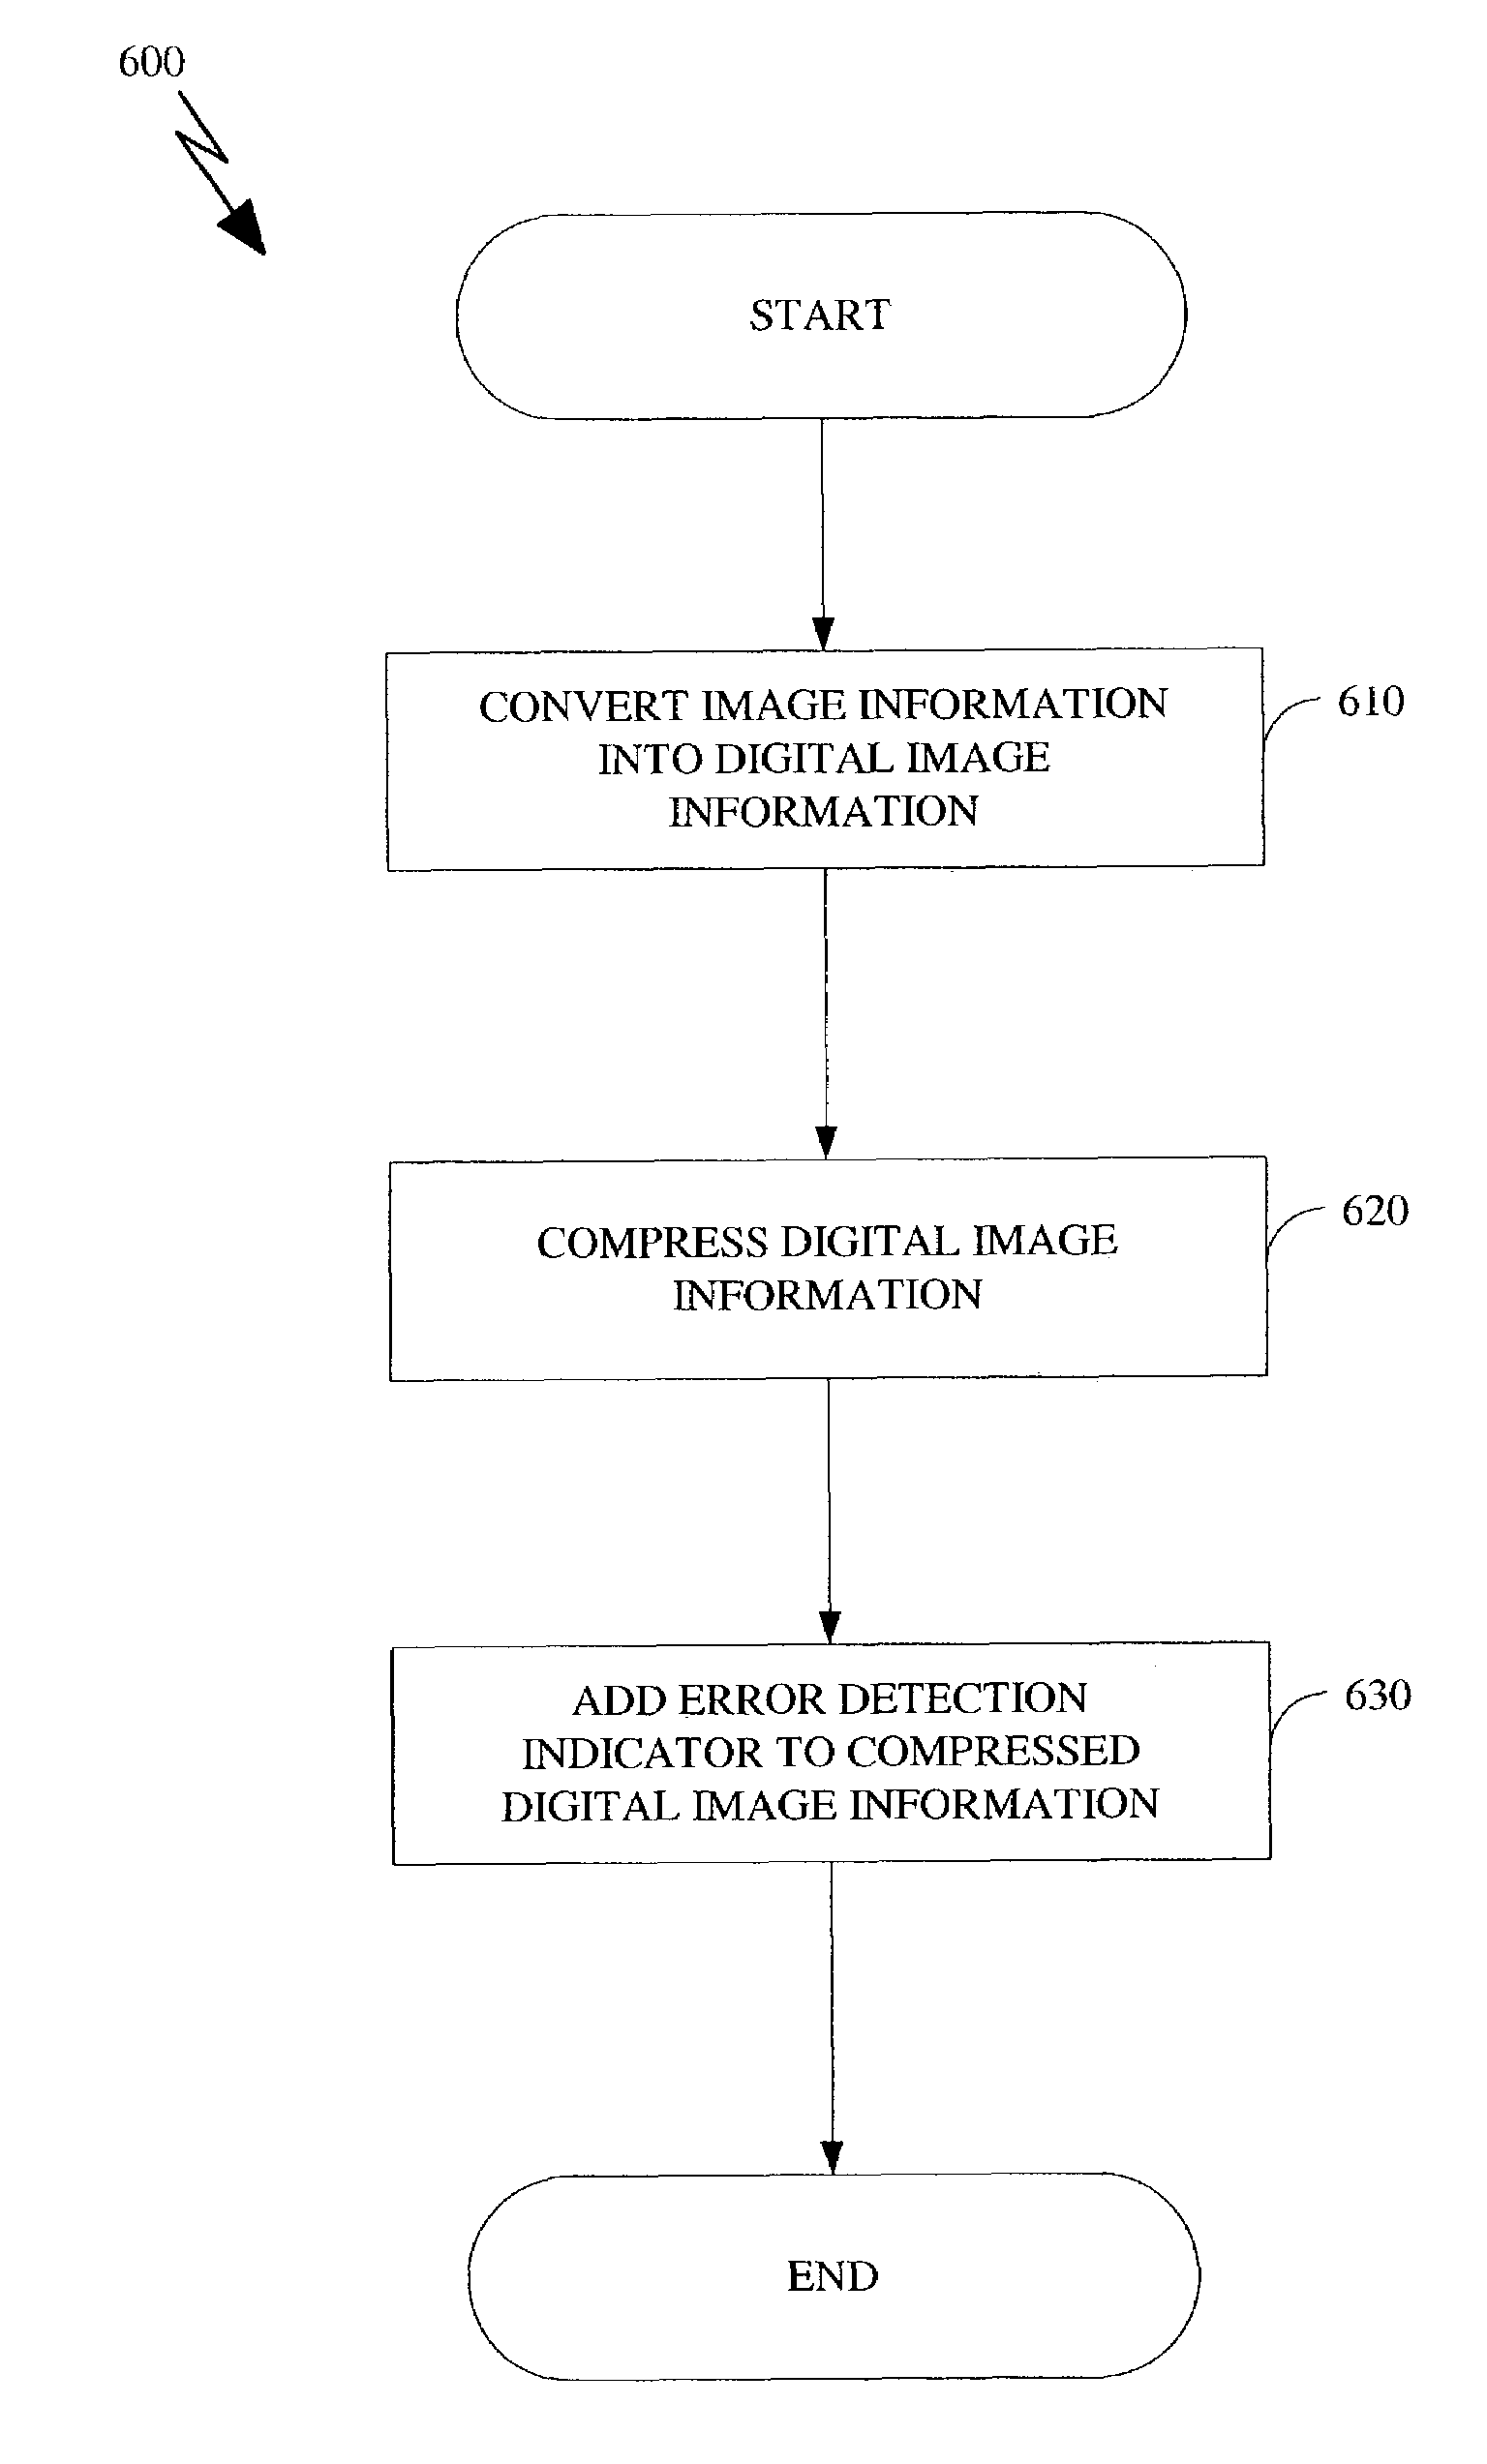 Apparatus and method for detecting error in a digital image